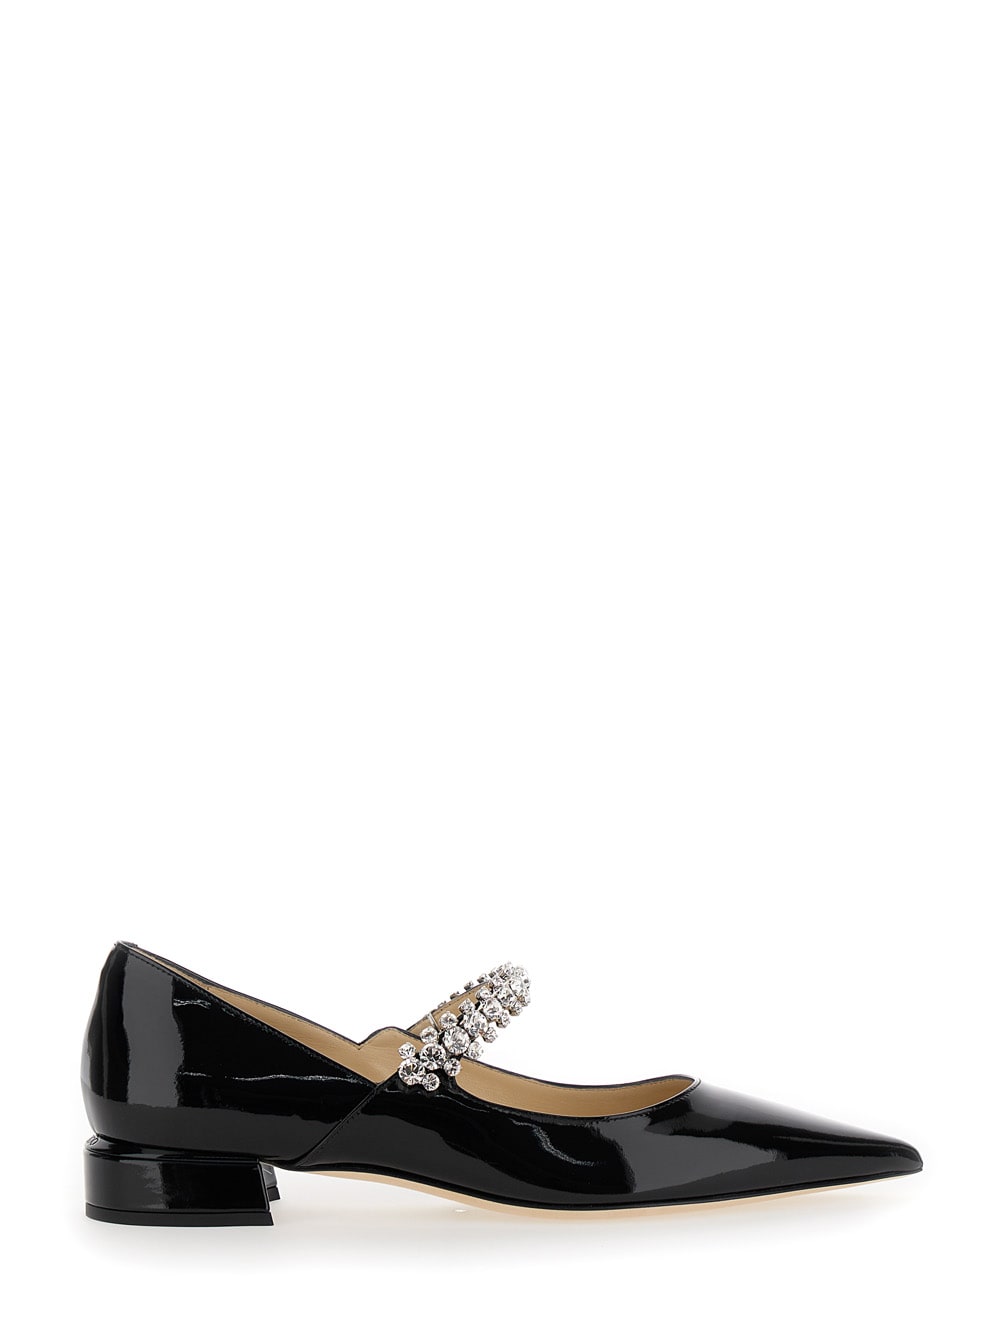 Black Ballet Flats With Crystals On Strap In Patent Leather Woman